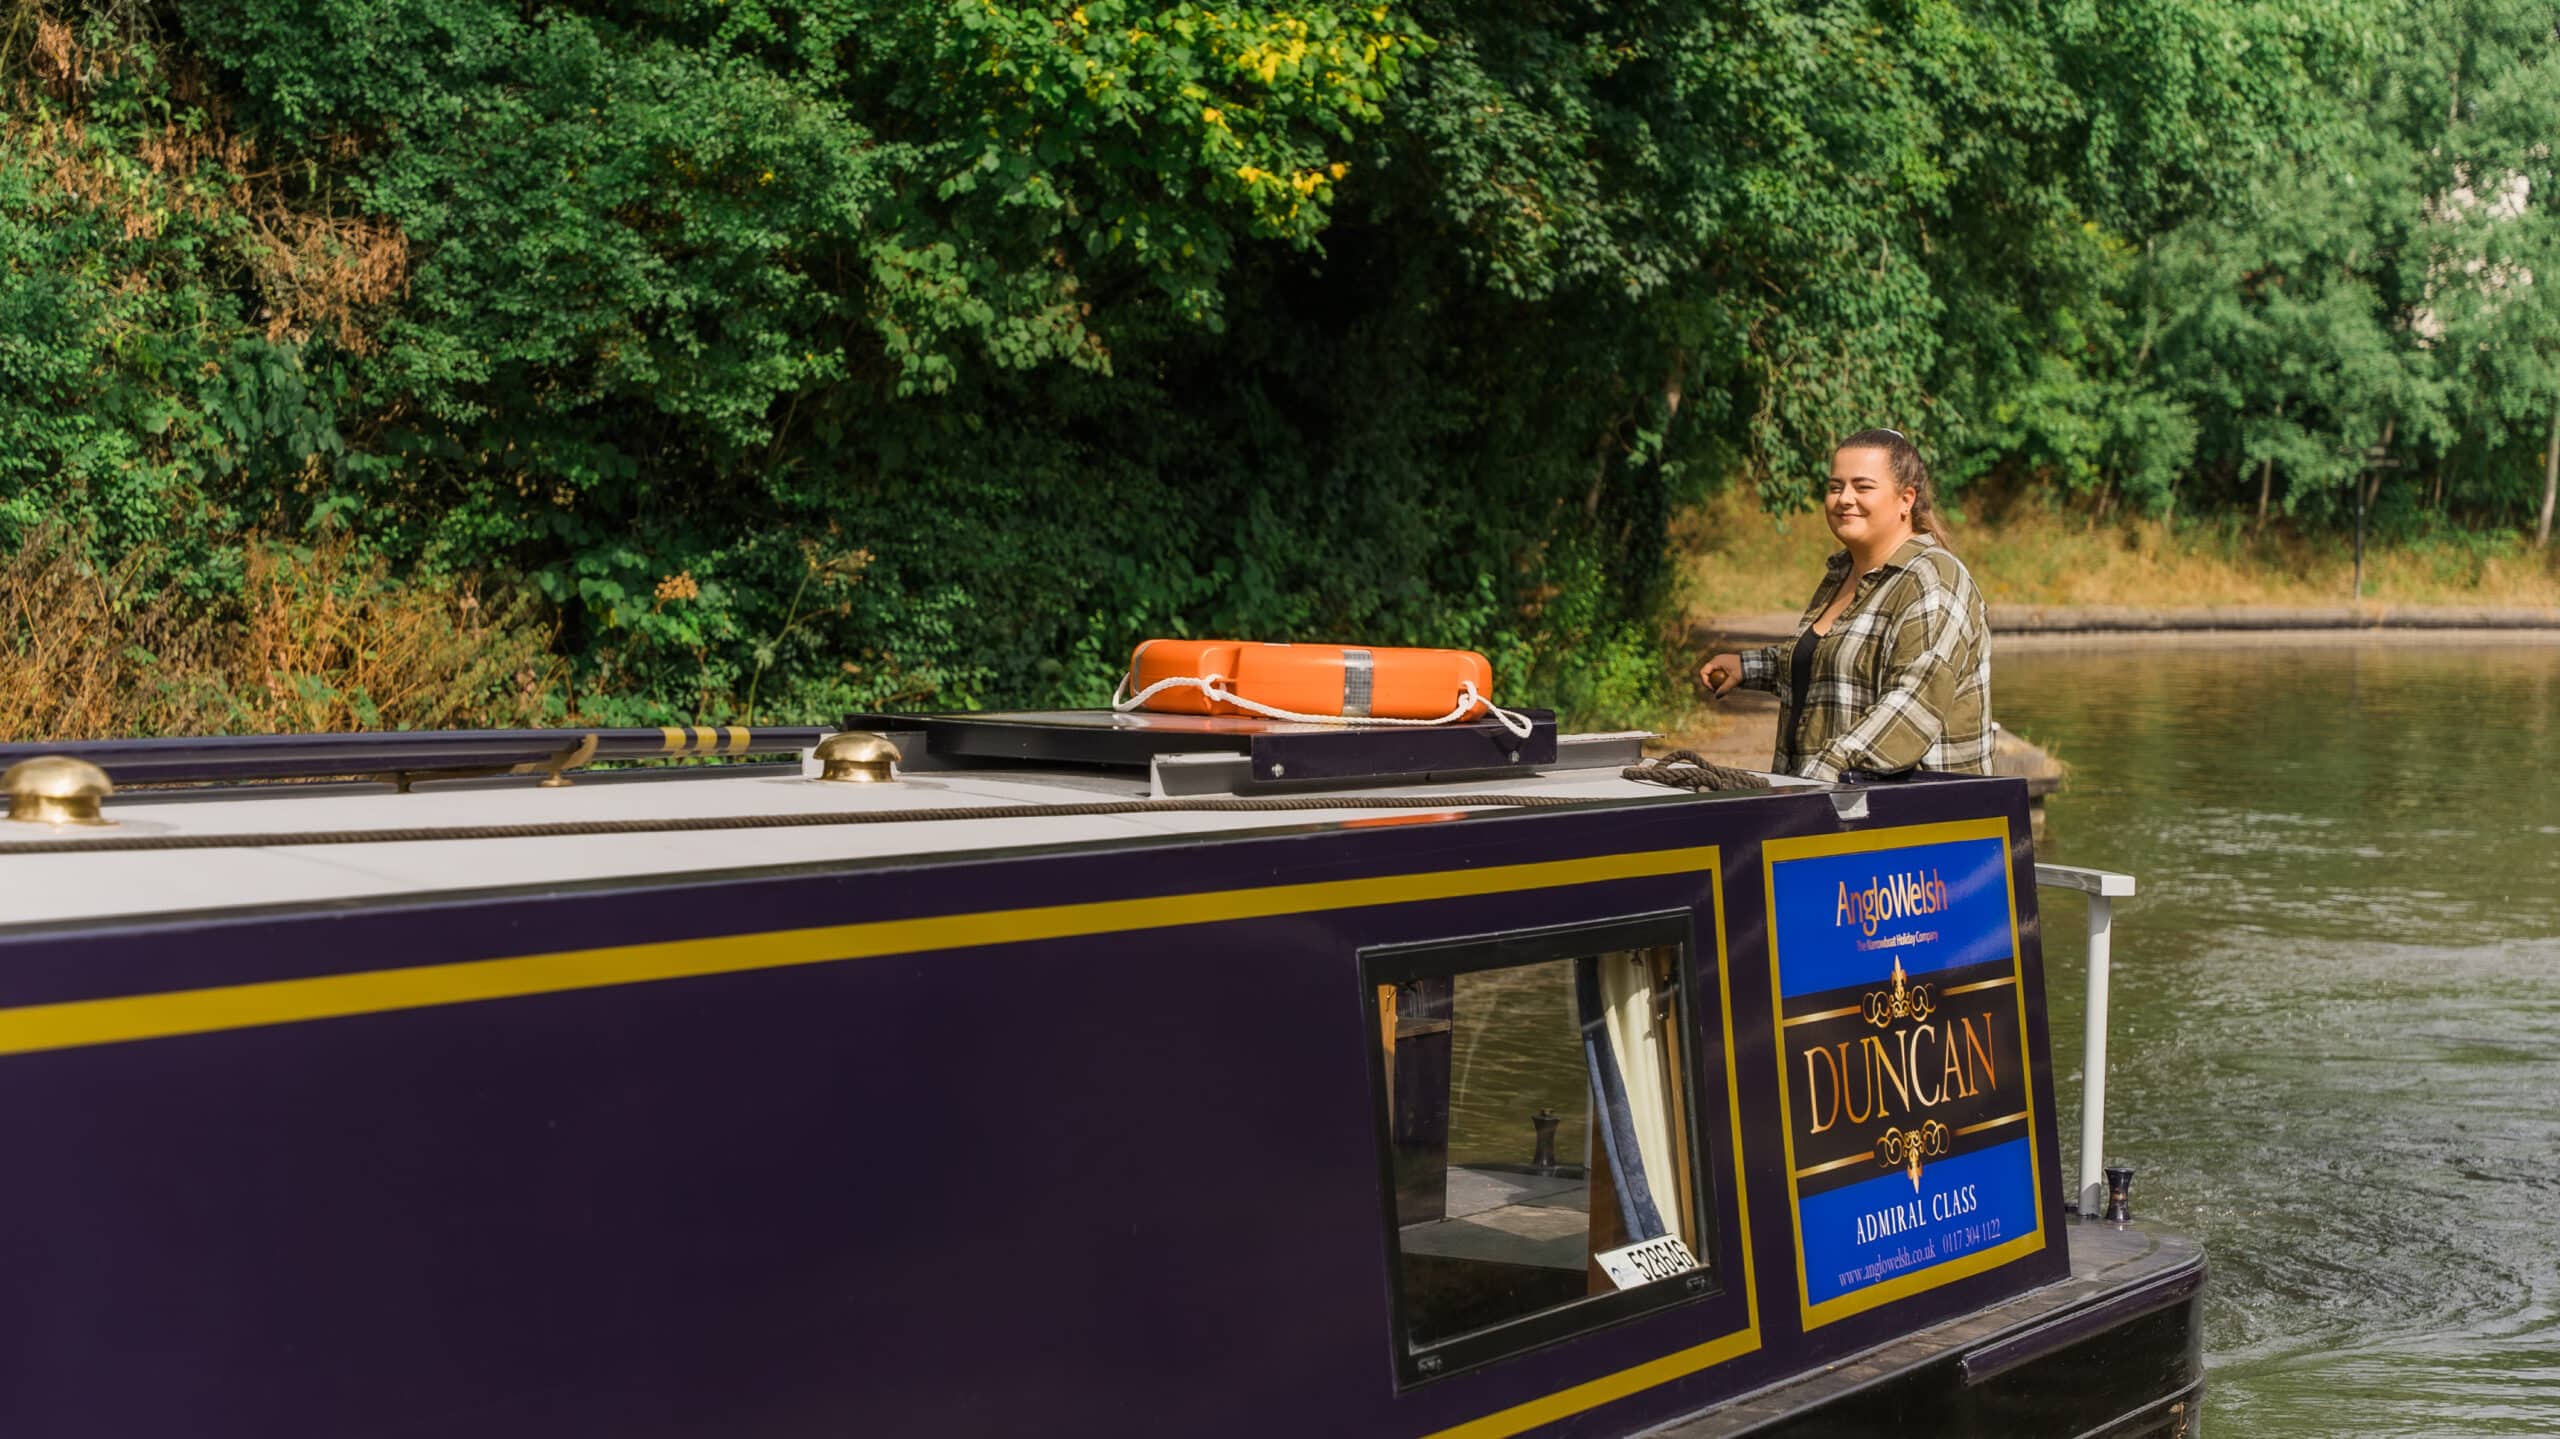 Canal boat holidays on the Staffordshire & Worcestershire Canal